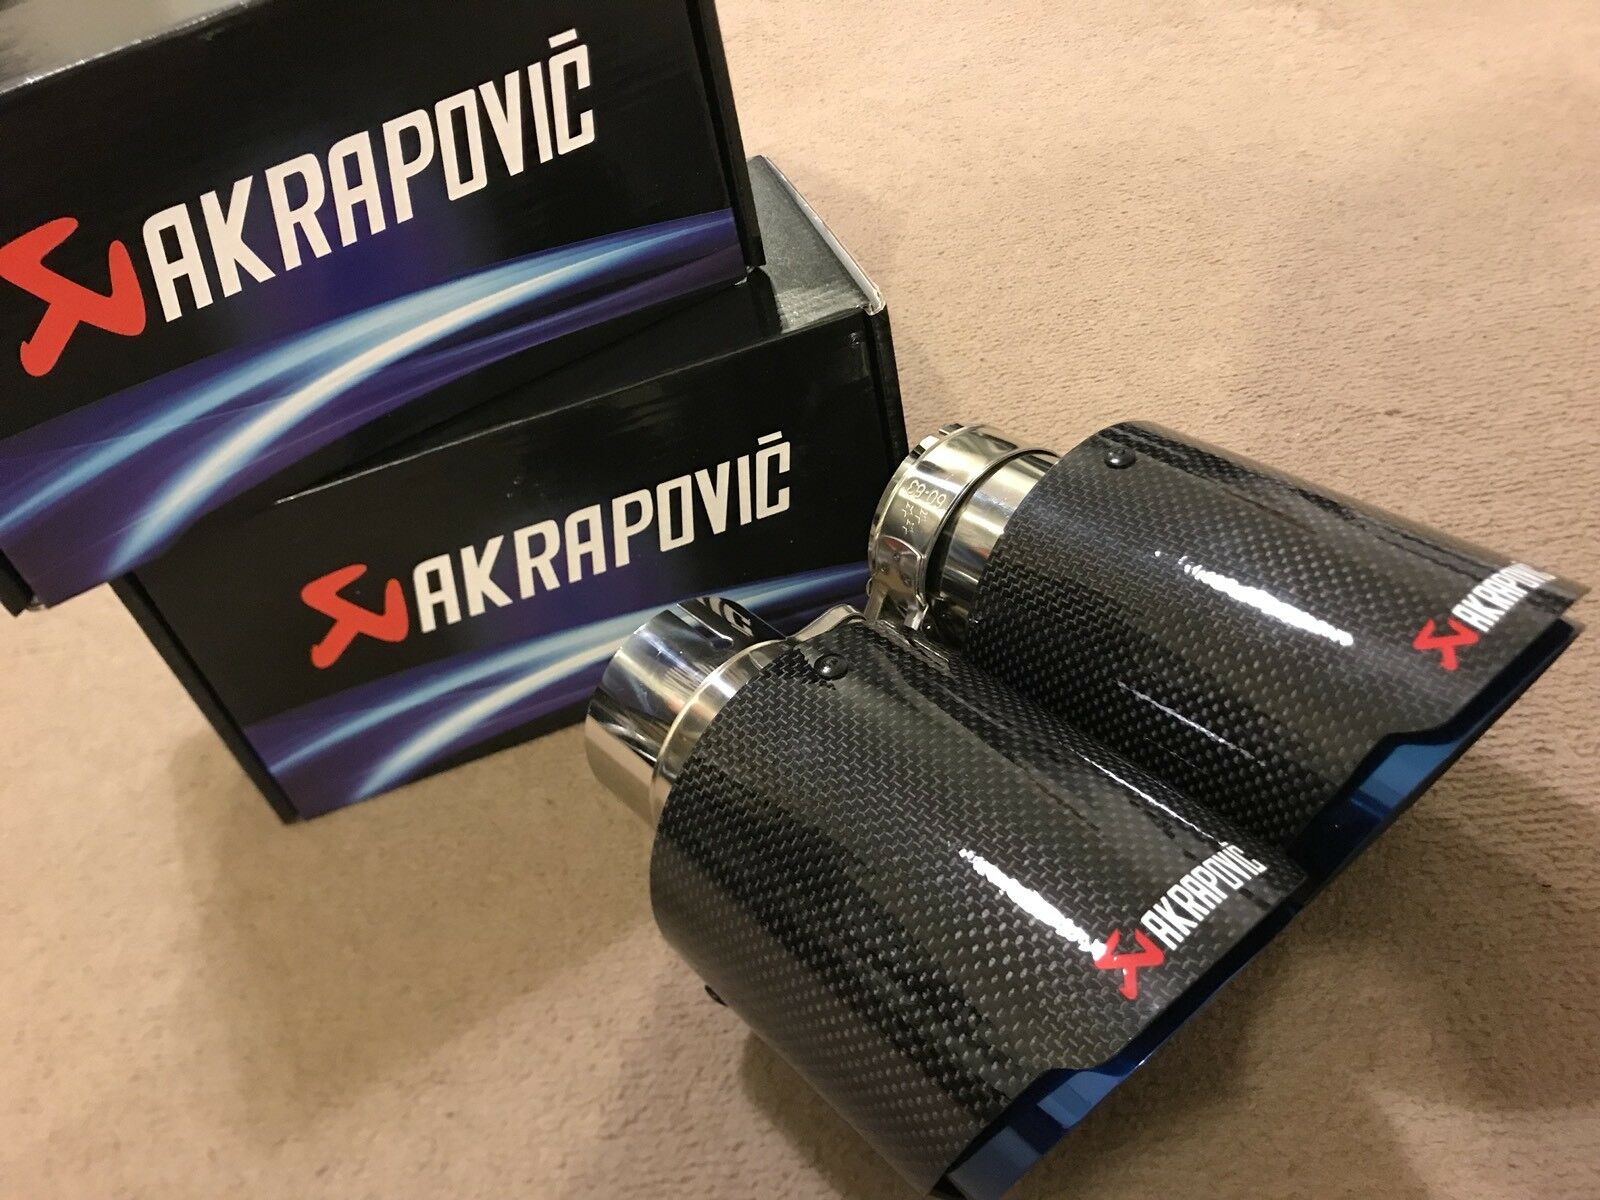 Akrapovic Blue End Exhaust Pipe Glossy Carbon Fiber Exhaust tip 63-76mm